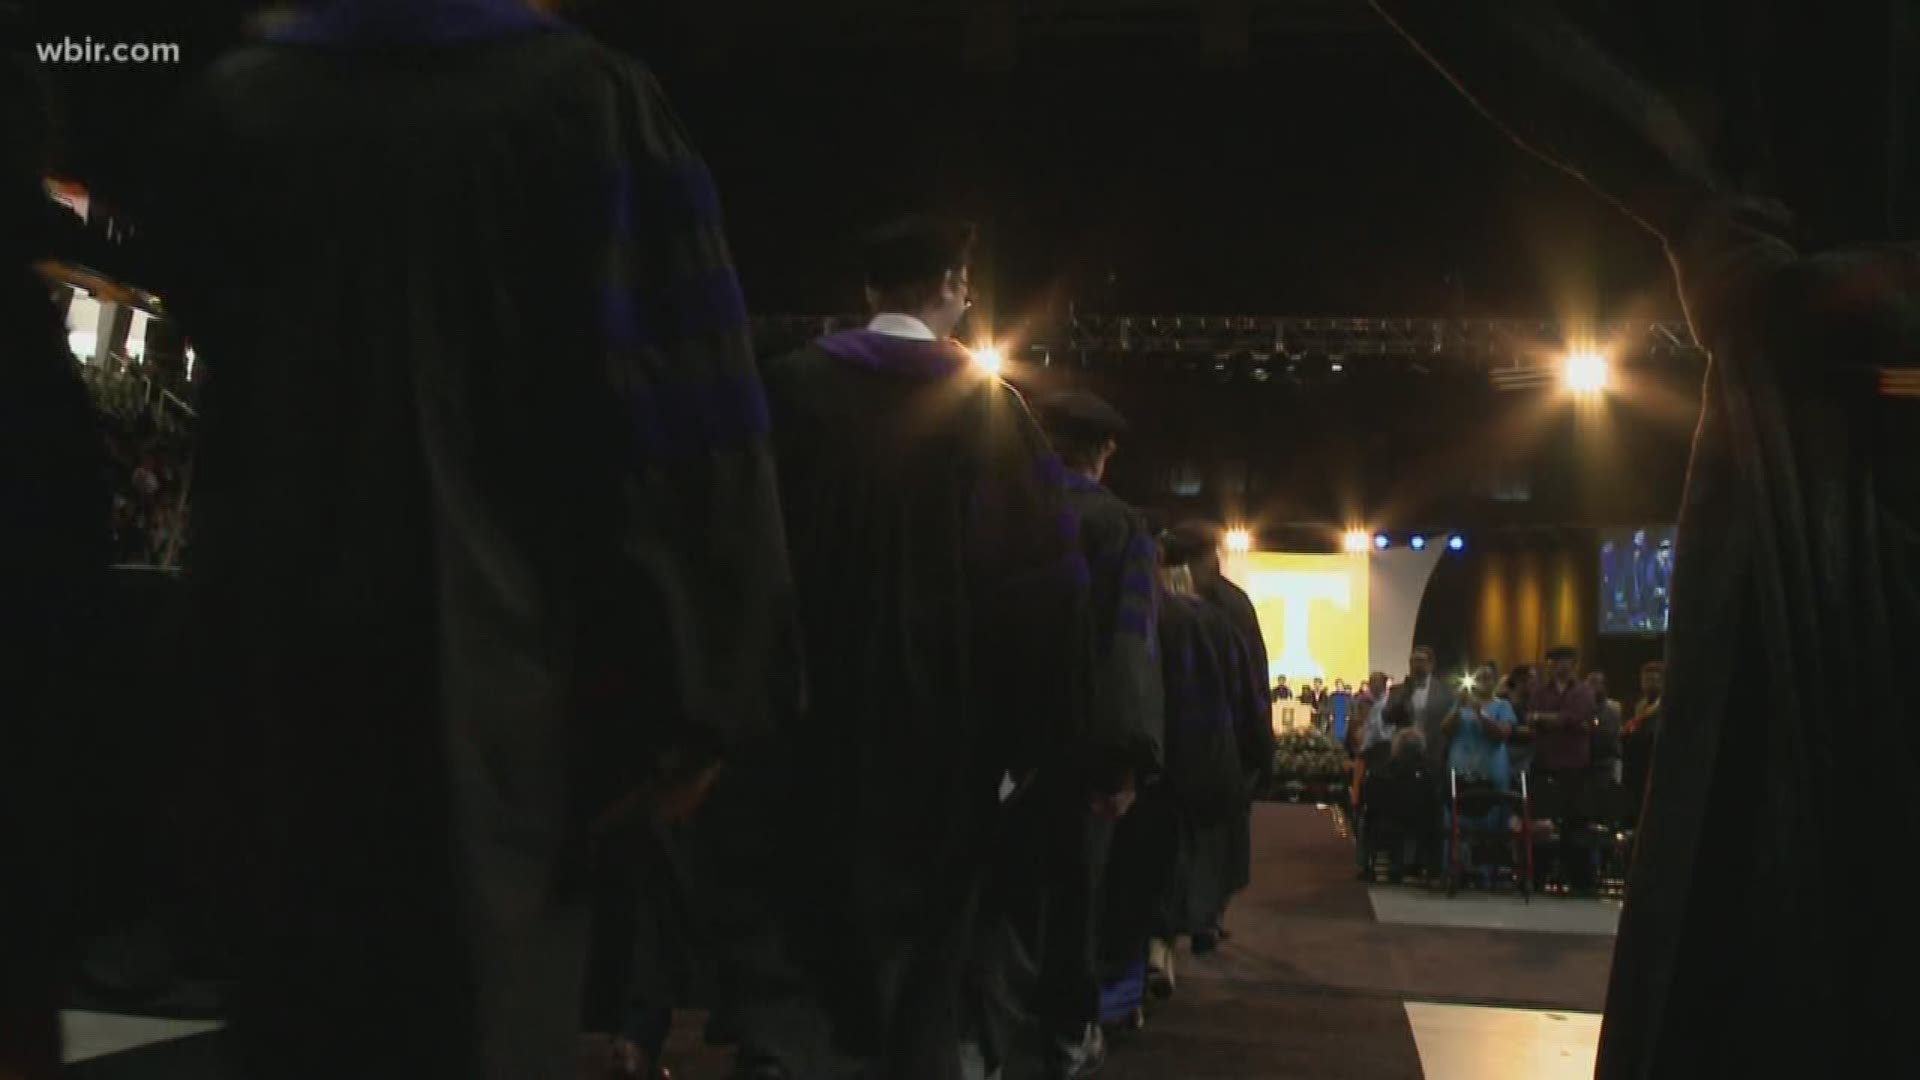 Here's what you need to know if you're attending UT graduation ceremonies this weekend.